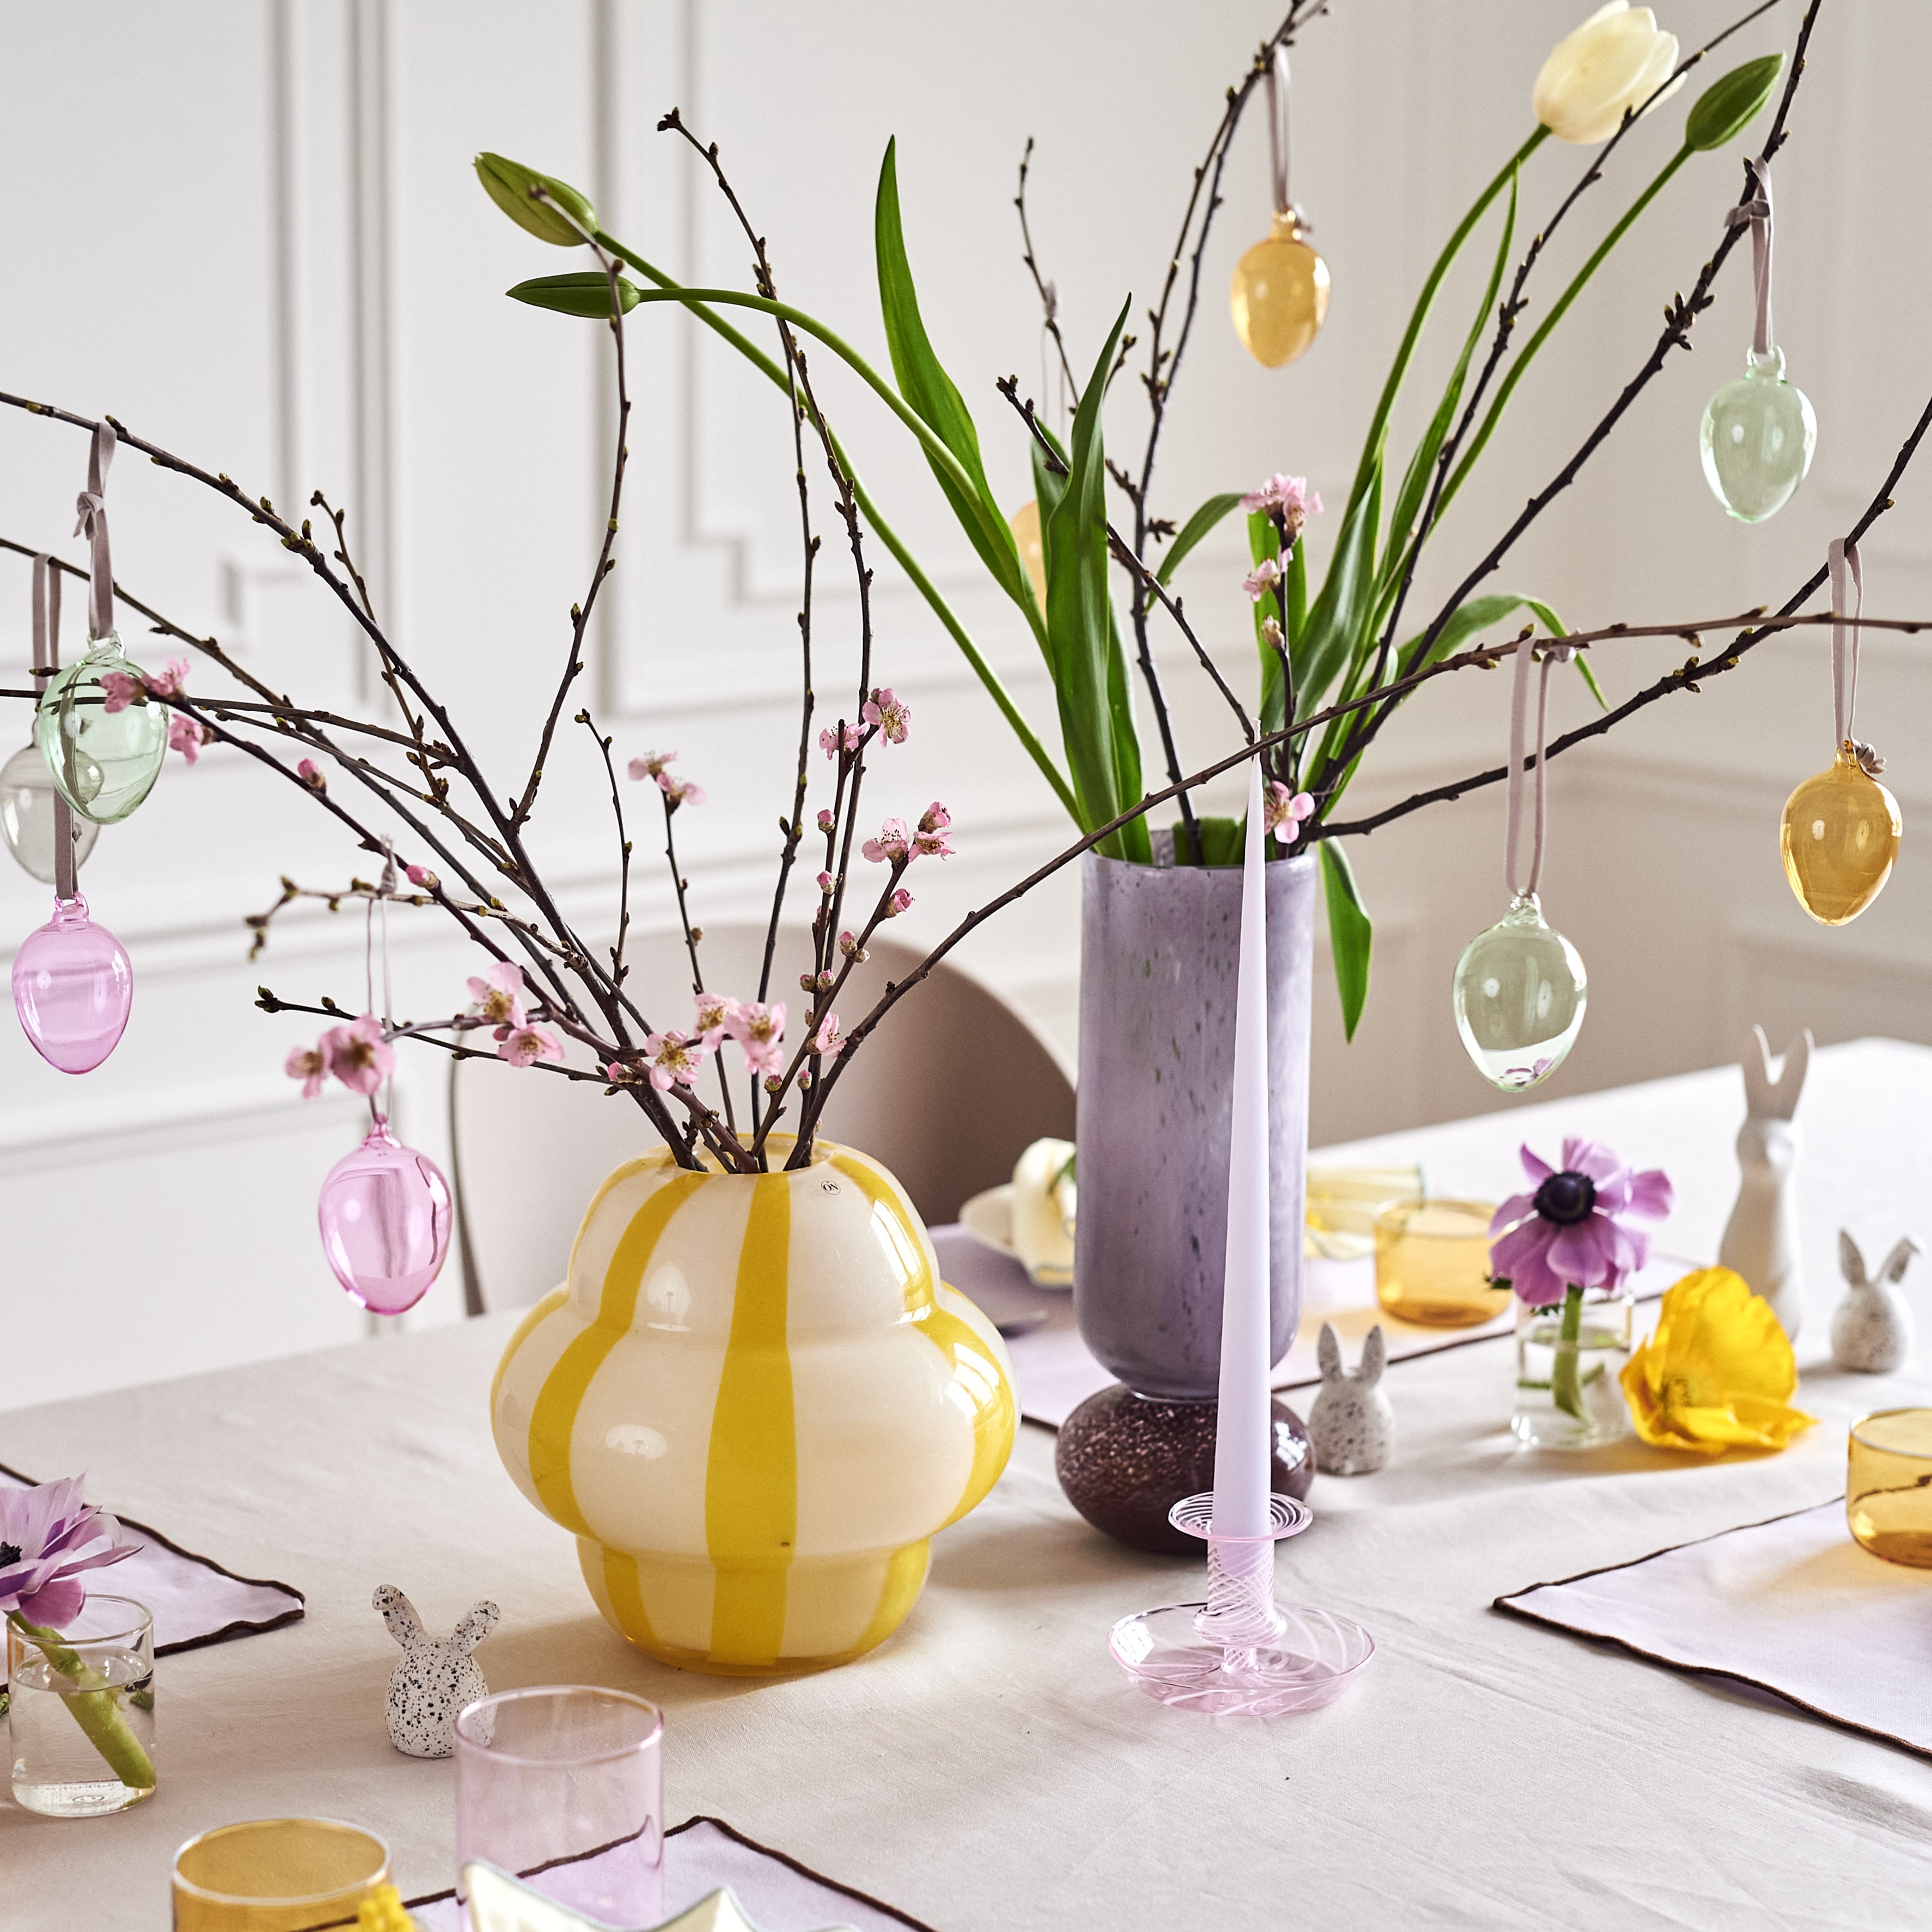 A Festive Easter table setting in spring pastels - 5 tips